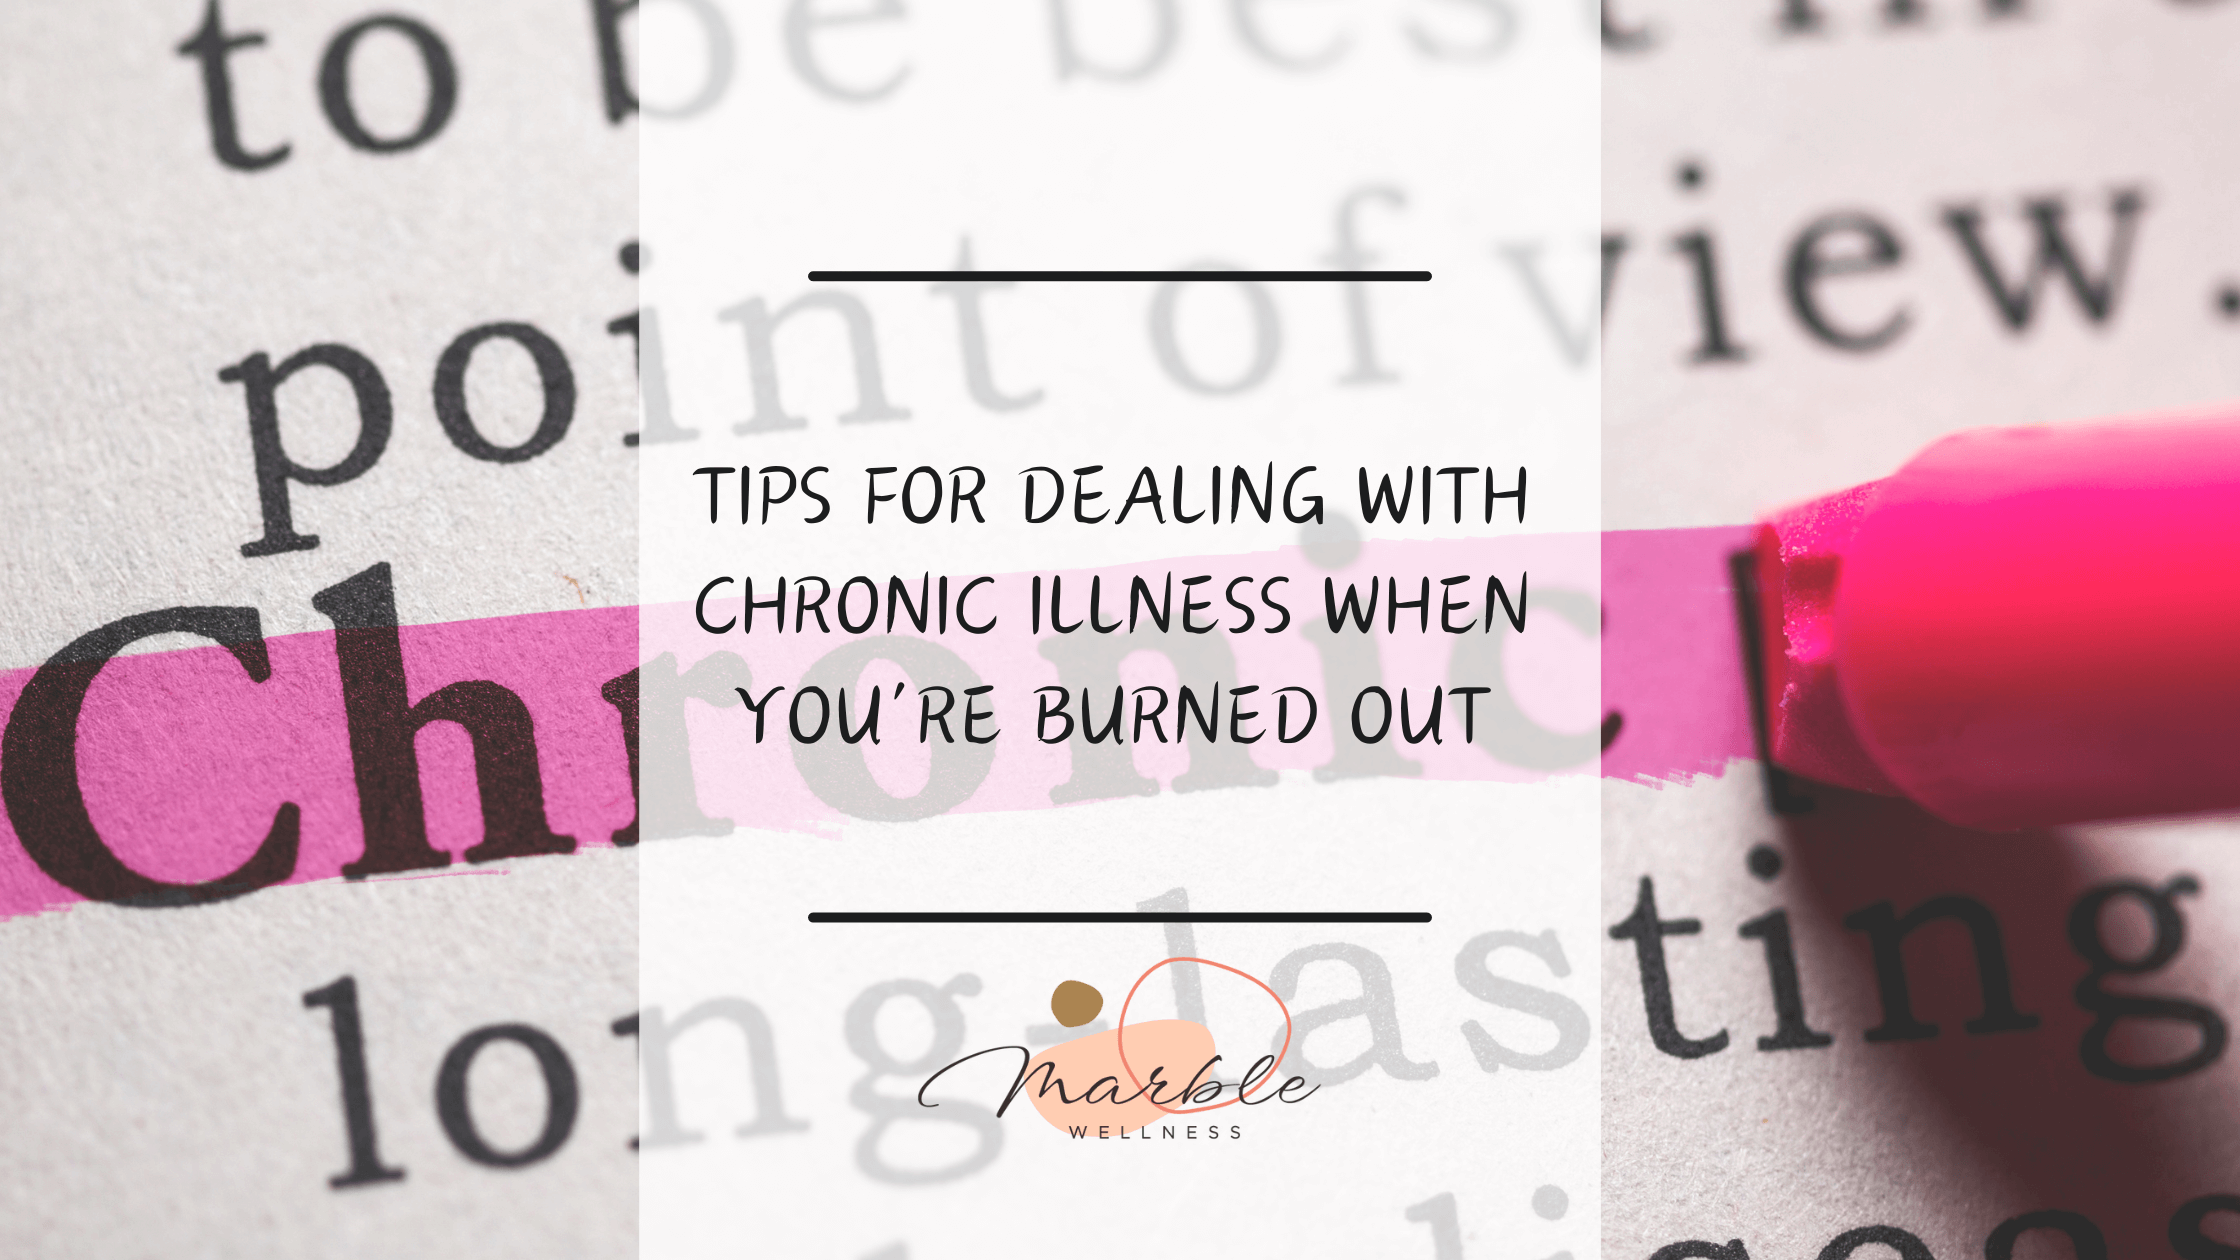 Photo of text with the words "Chronic Illness Burnout" highlighted. This represents how these tips from our St. Louis therapists can help you regain control and find balance while dealing with chronic illness.